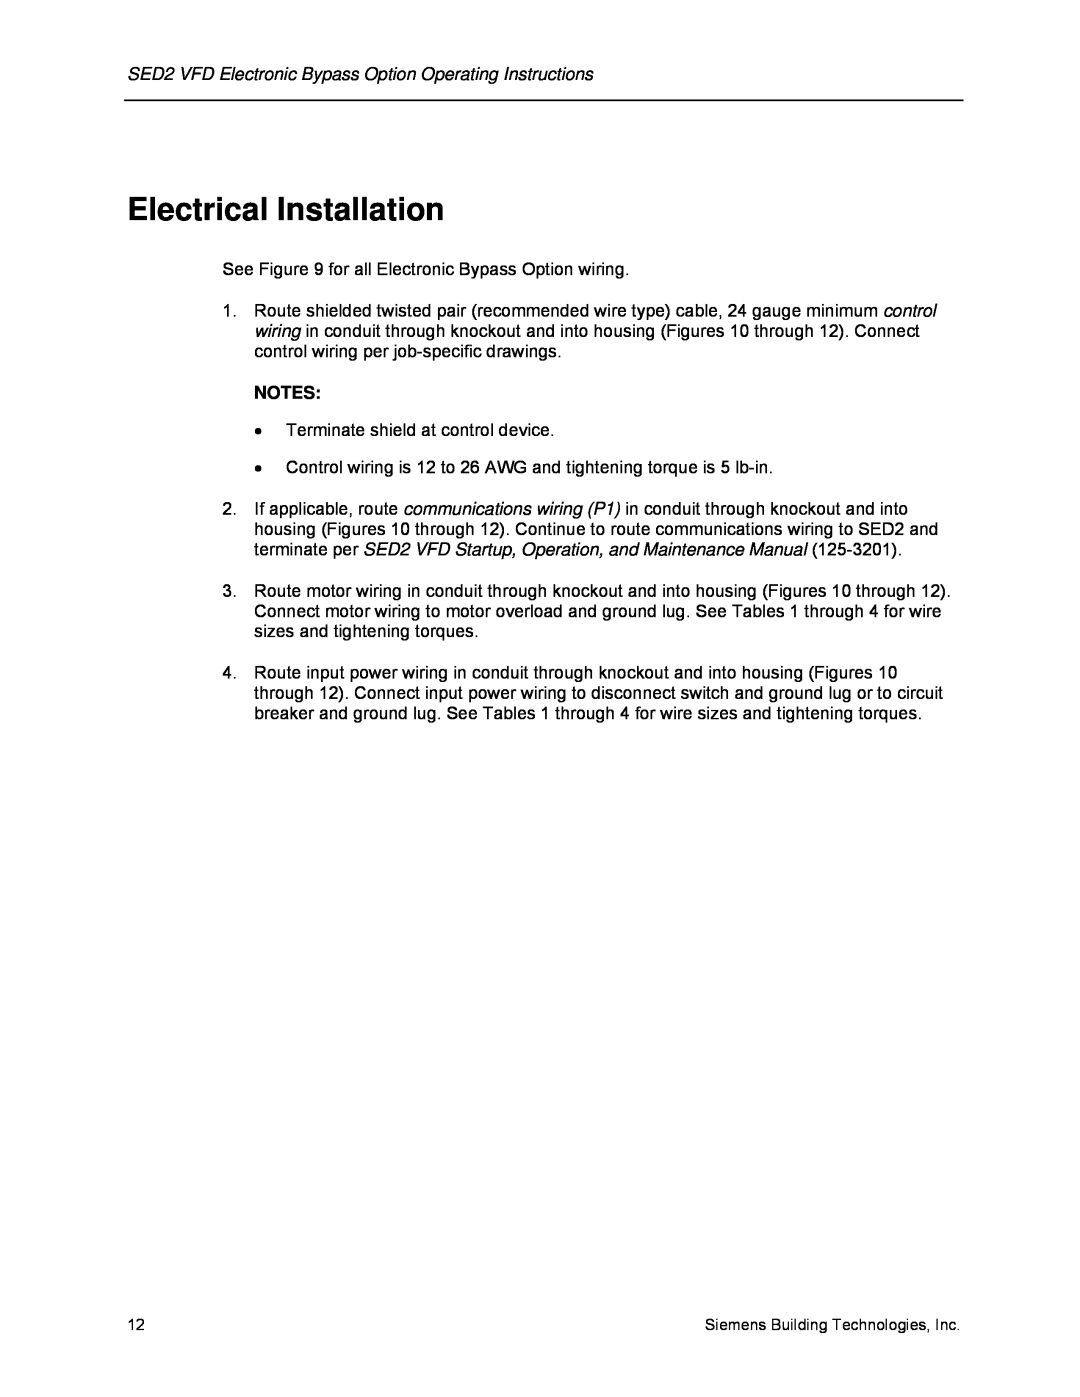 Siemens 125-3208 operating instructions Electrical Installation 